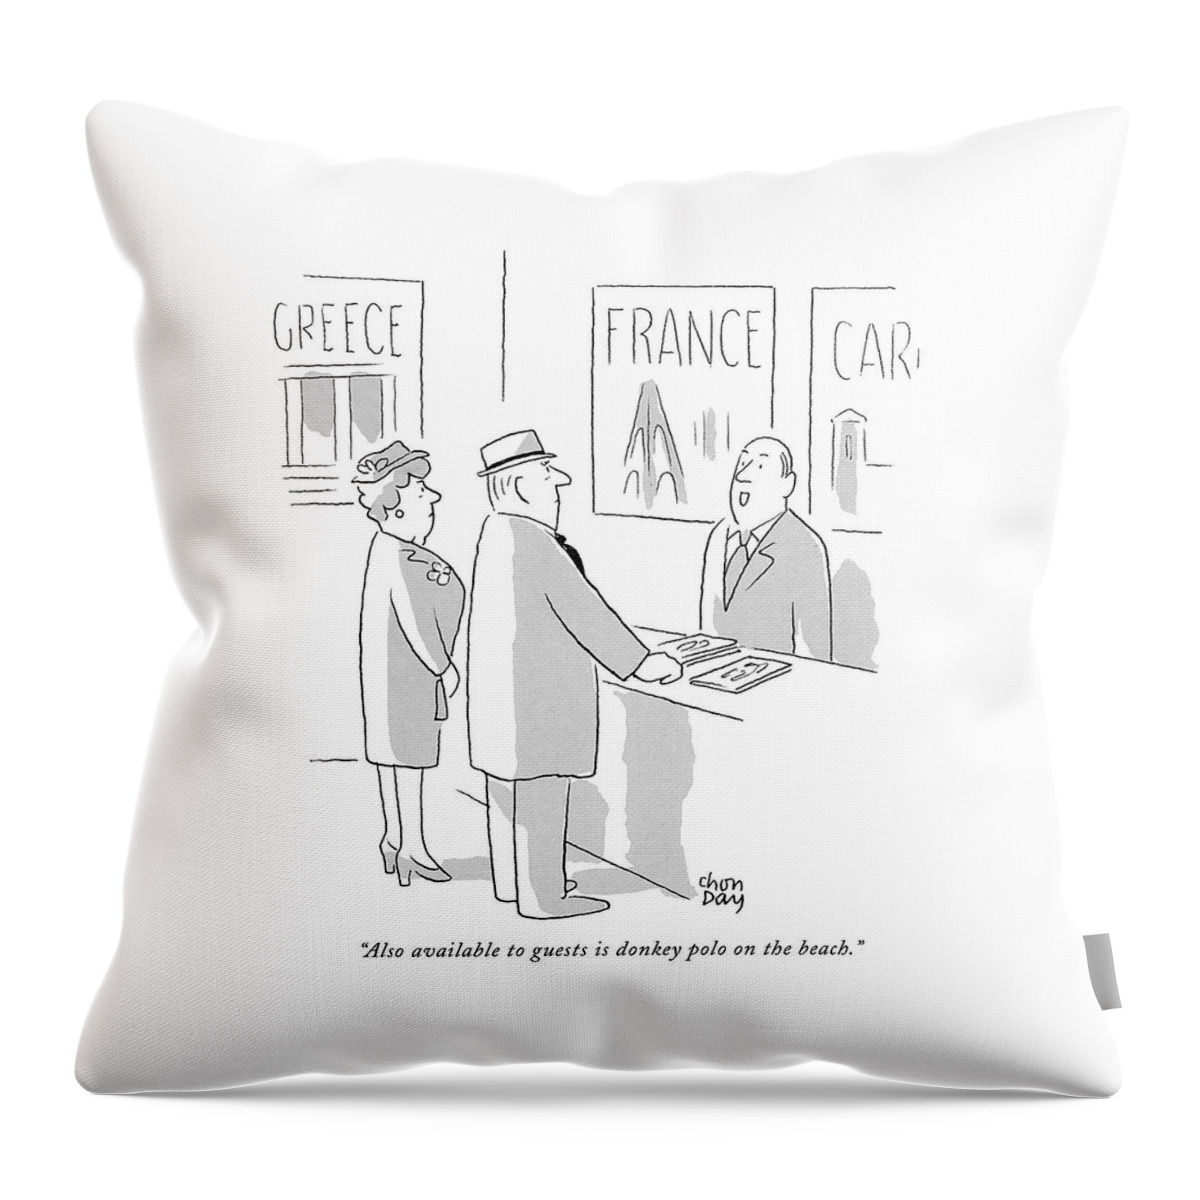 Also Available To Guests Is Donkey Polo Throw Pillow